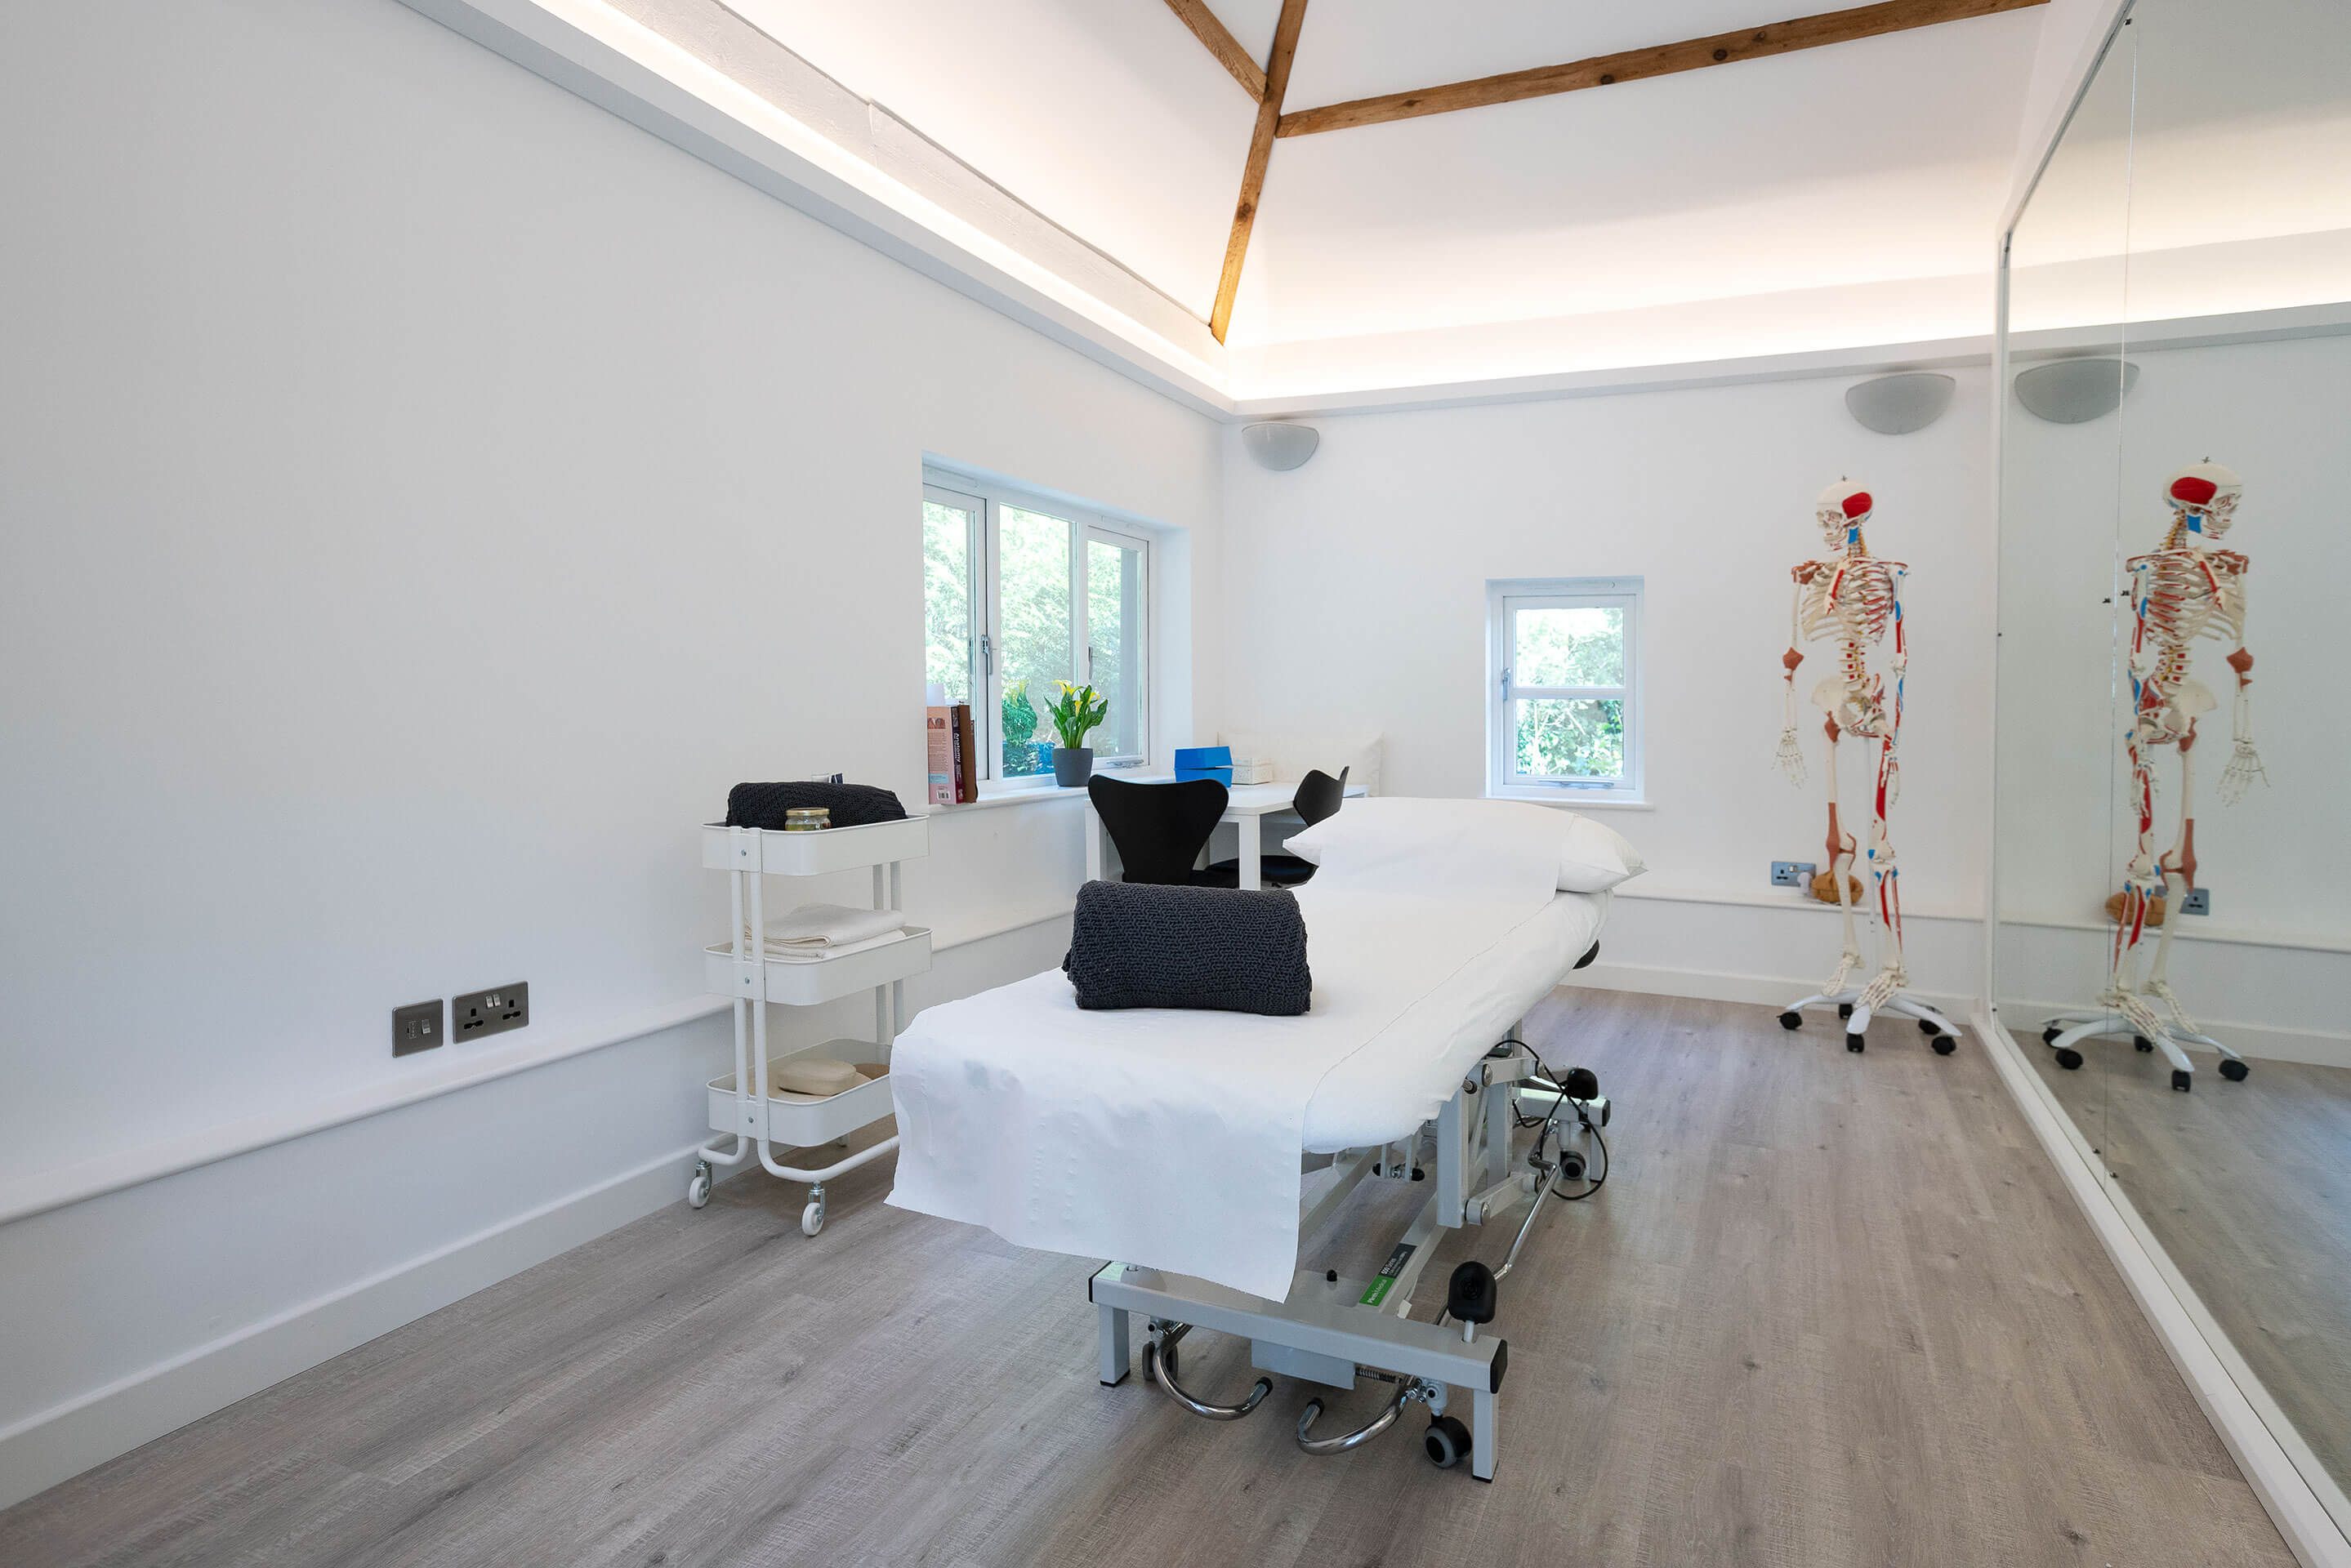 The Form Practice is located in a beautifully renovated barn with treatment rooms for Osteopathy, K Laser, Nutrition and Homeopathy